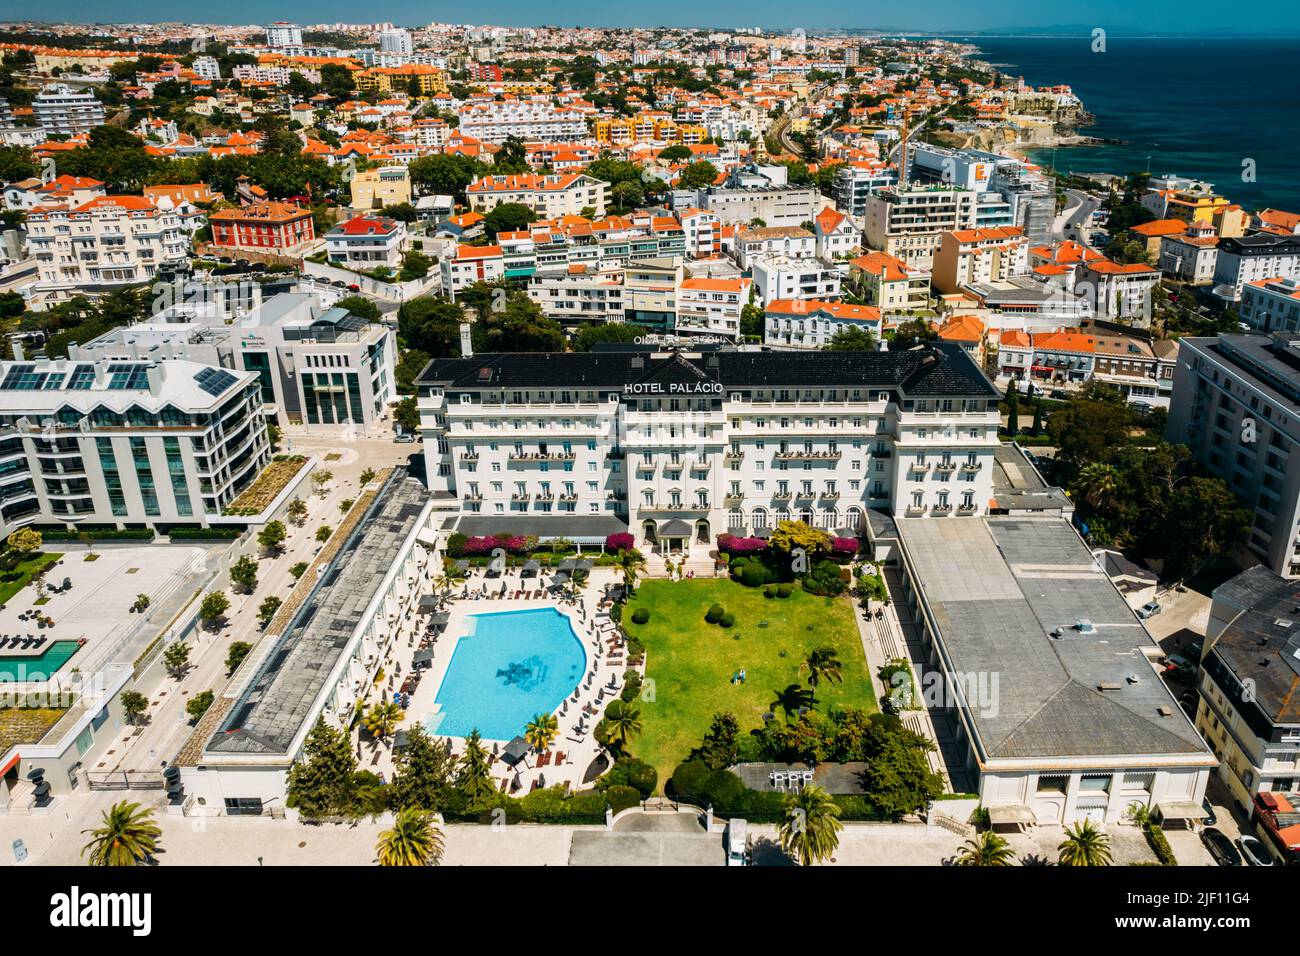 Estoril, Portugal - June 28, 2022: Aerial view of famous Hotel Palacio in Estoril, Portugal with surrounding neighbourhood Stock Photo